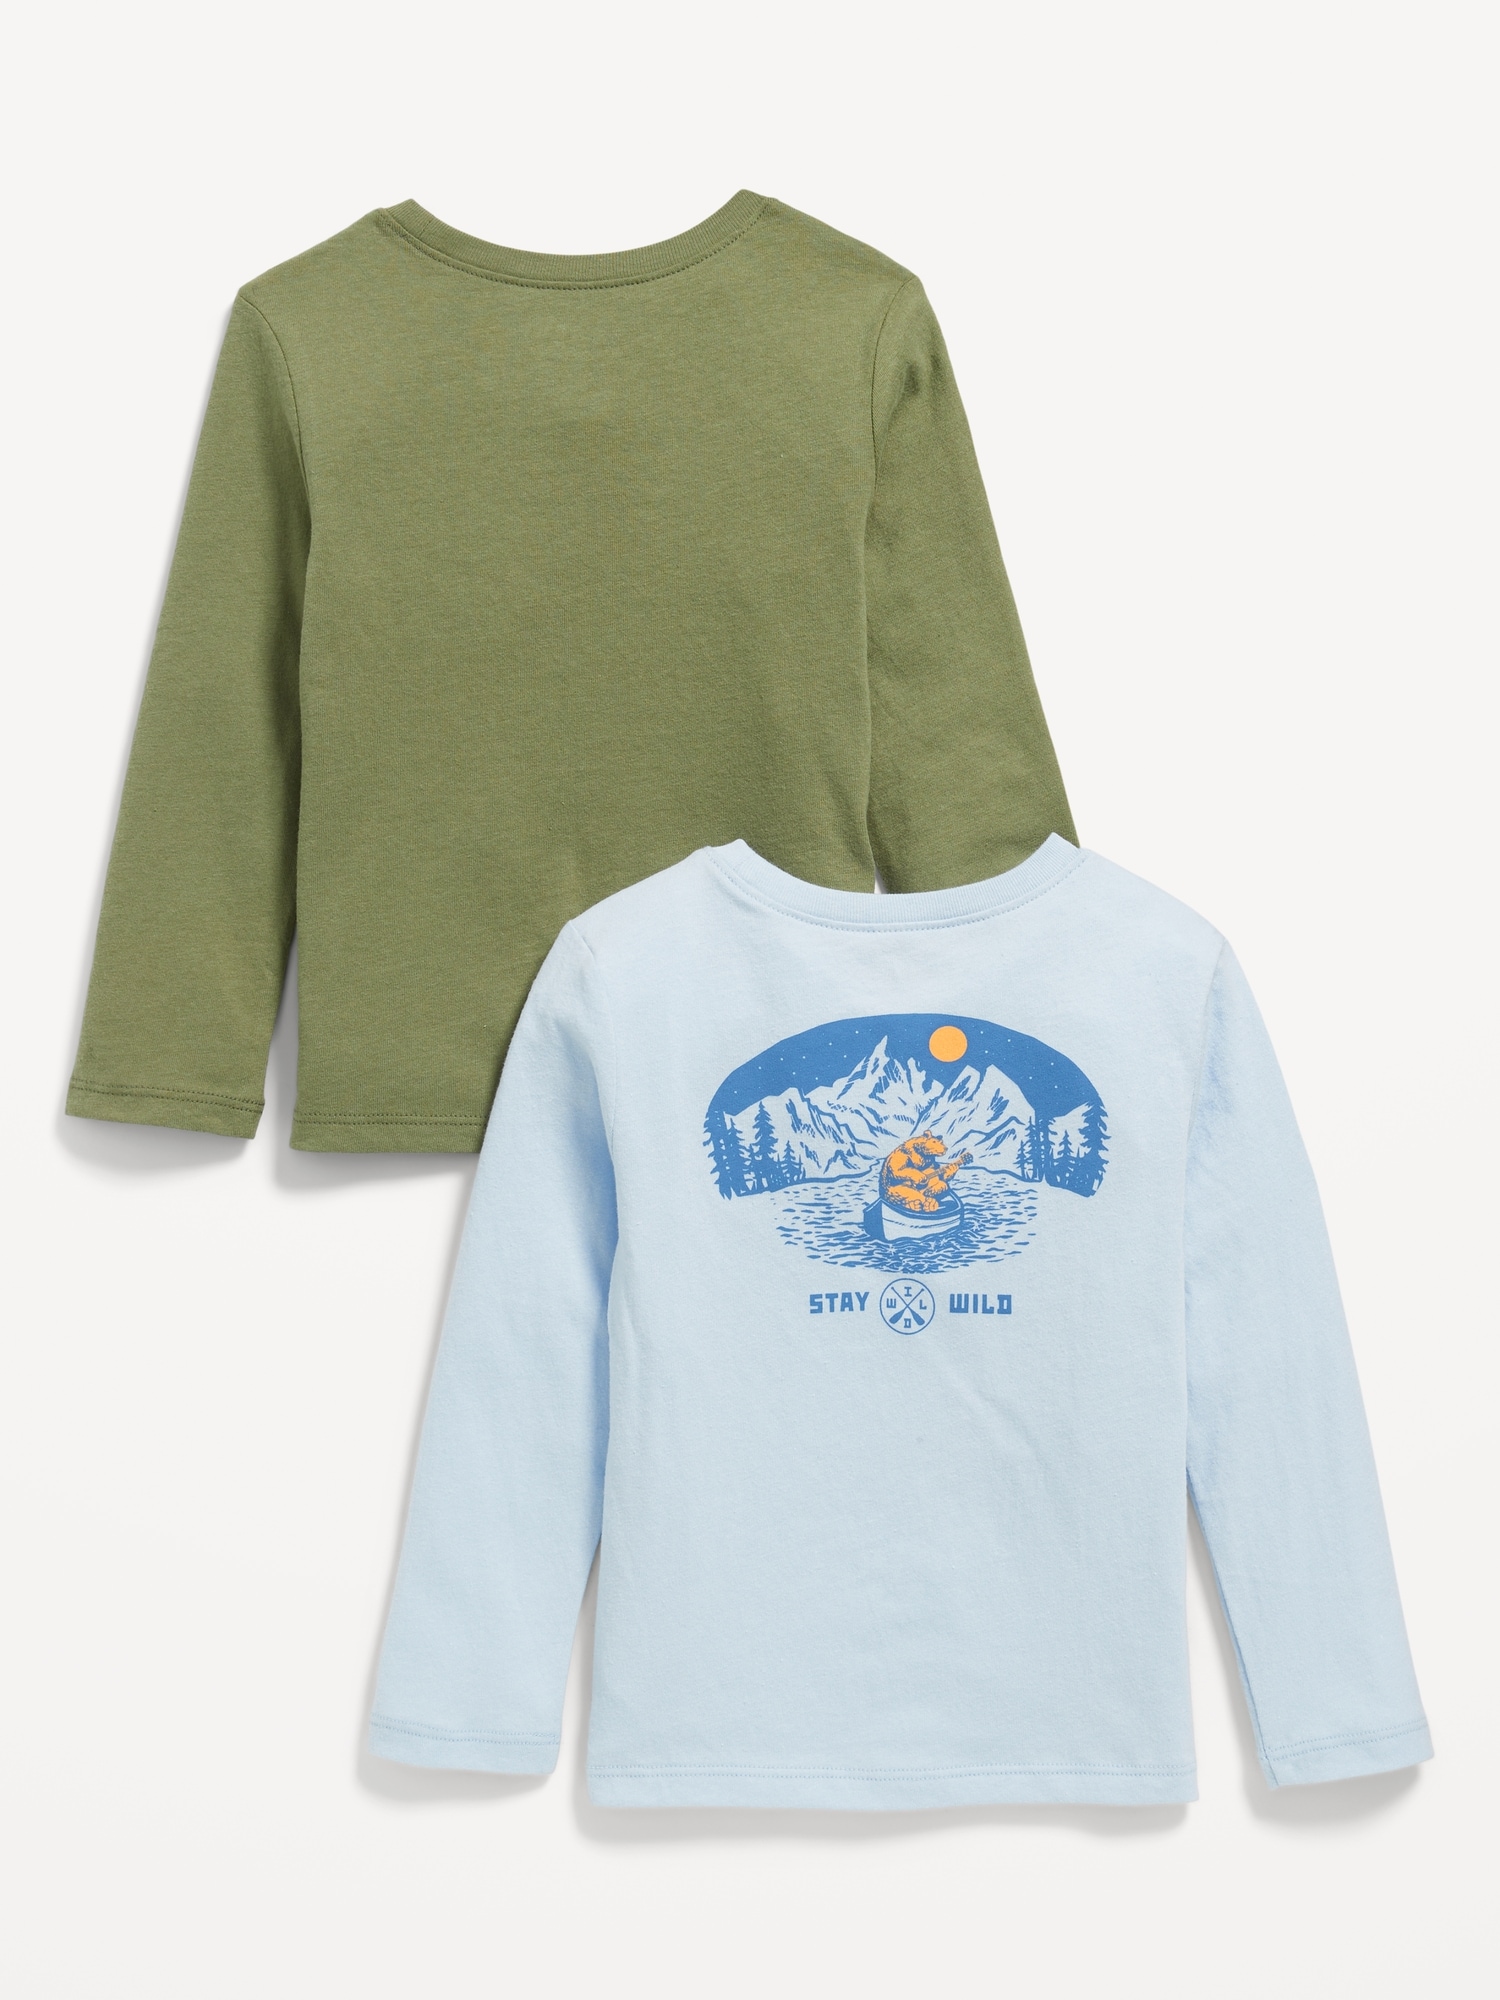 Long-Sleeve Graphic T-Shirt 2-Pack for Toddler Boys